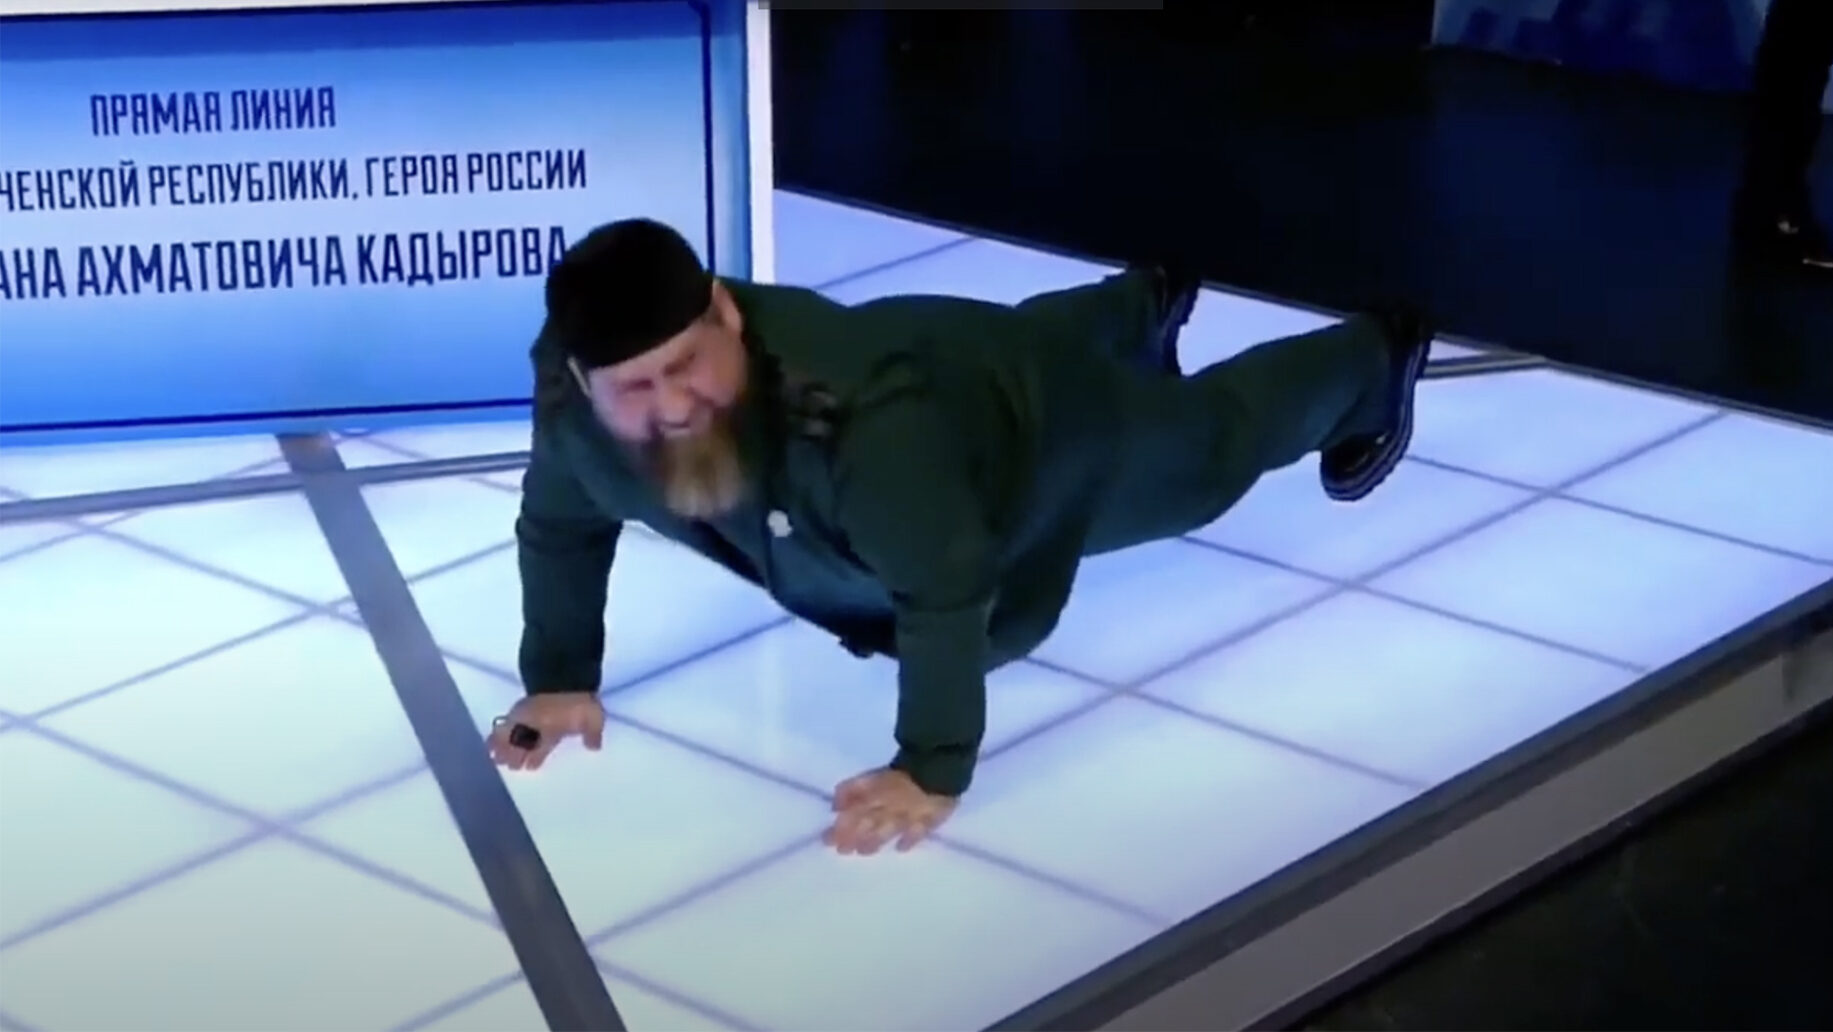 Chechen dictator demonstrates how to do 40 really bad push-ups on Russian TV